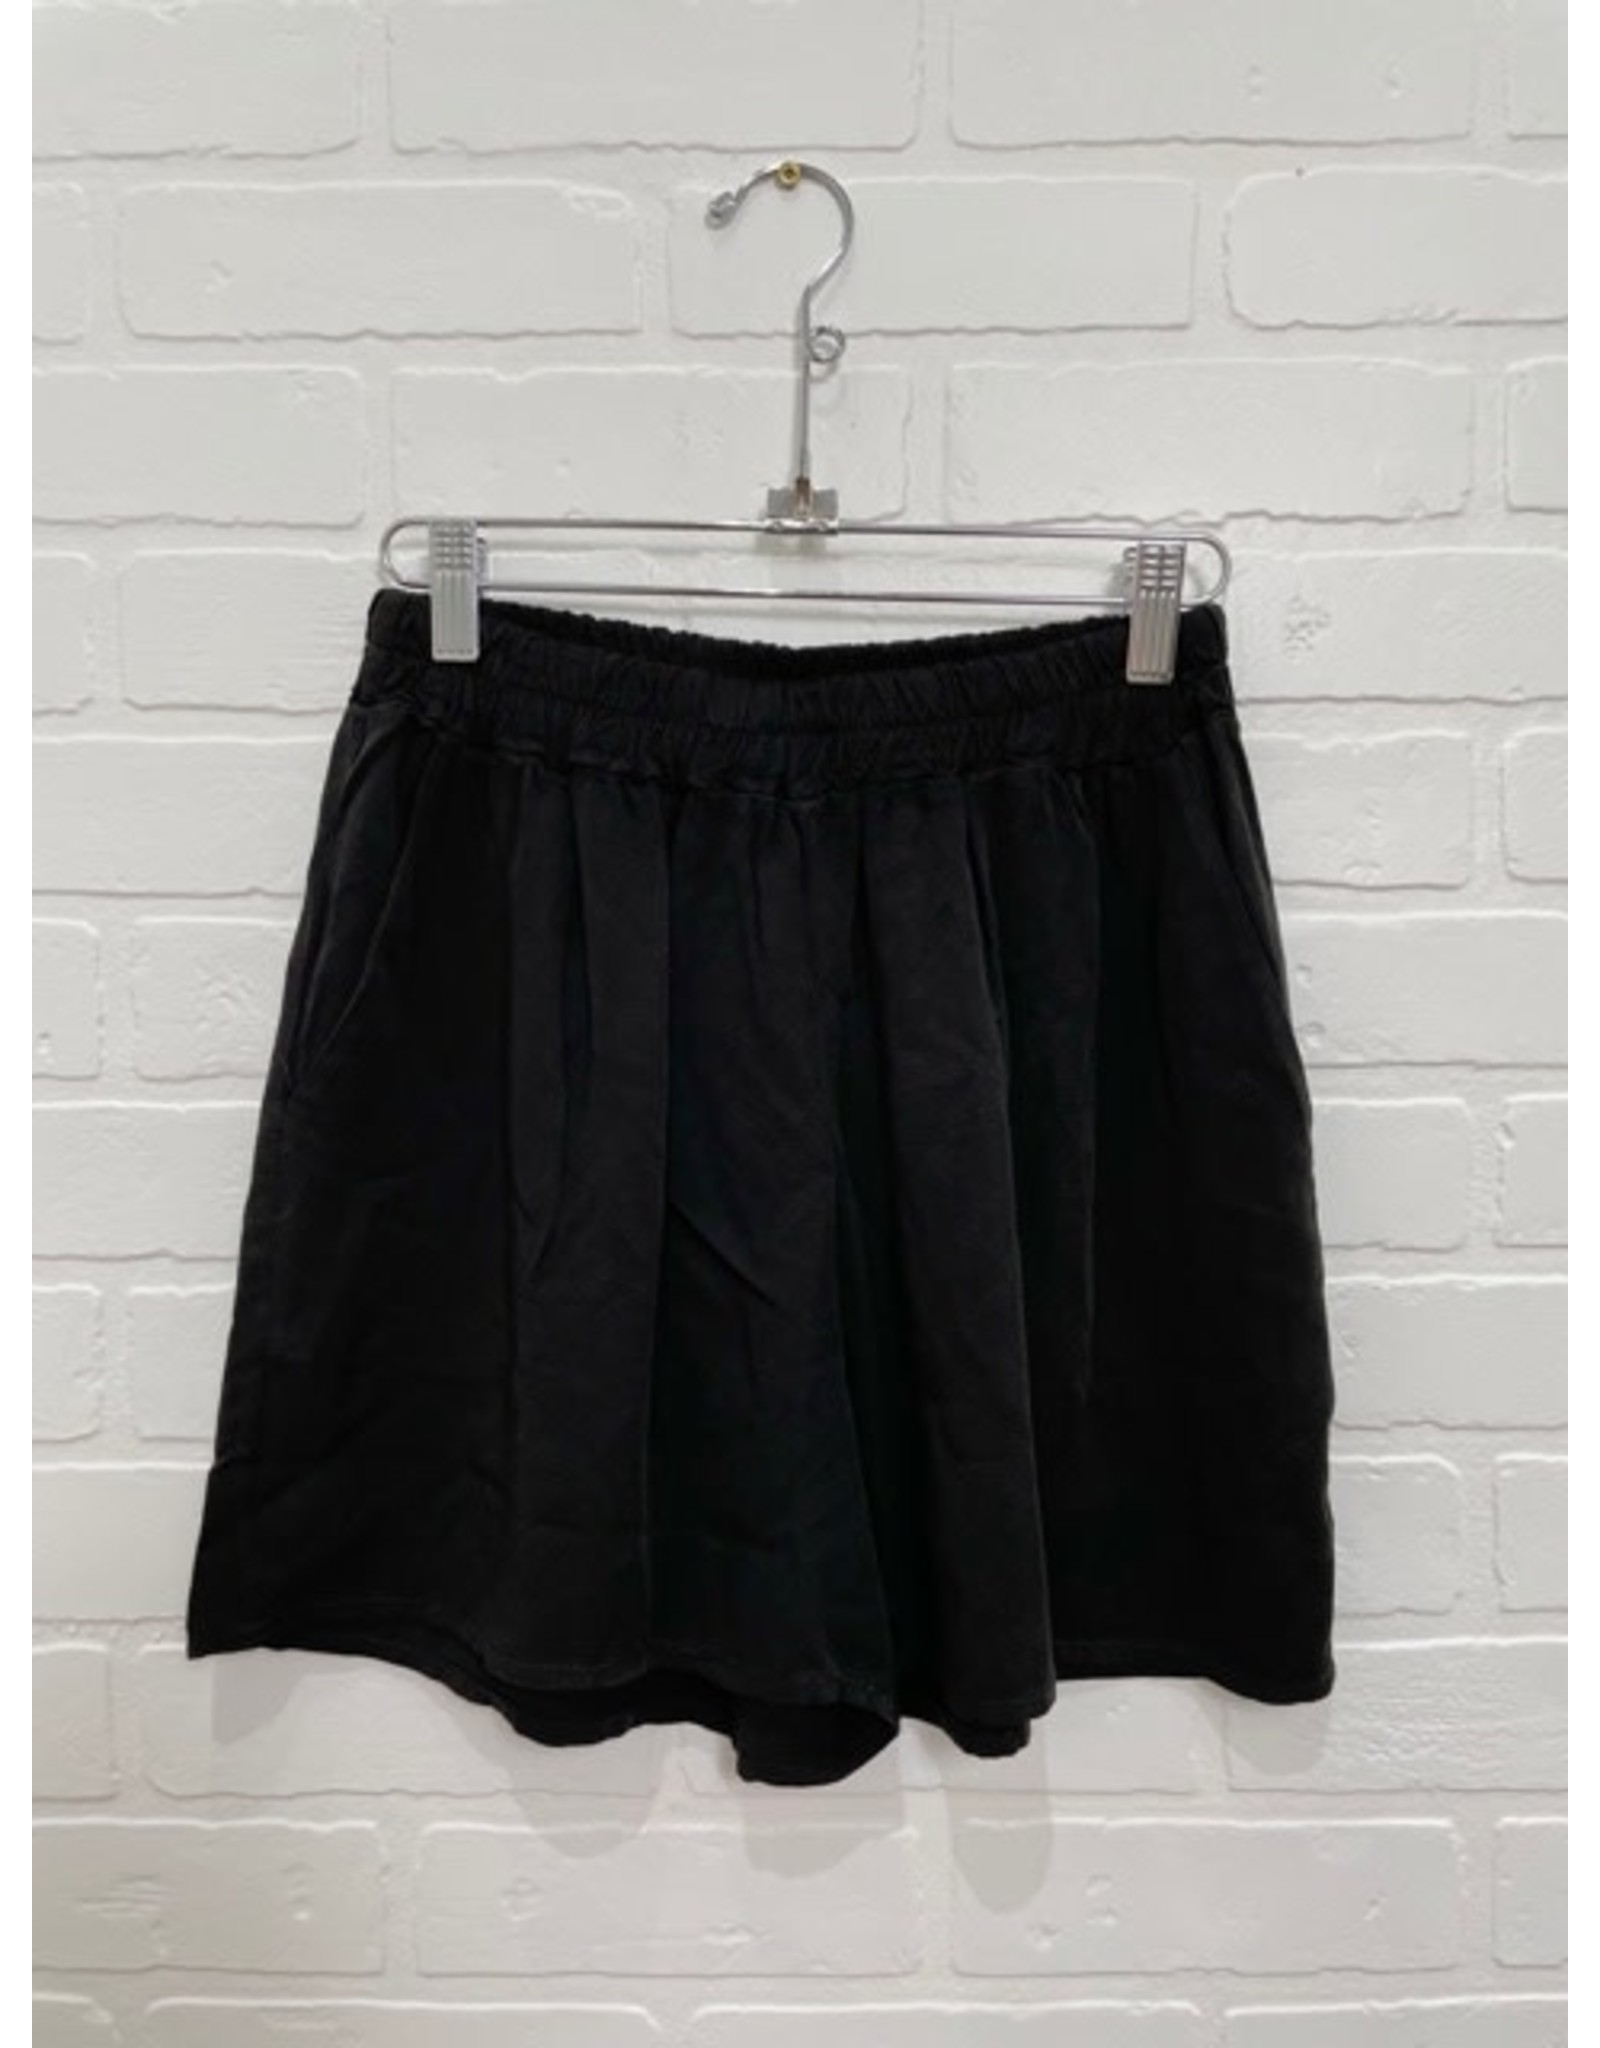 M - Made in Italy Made in Italy - Woven shorts (black)